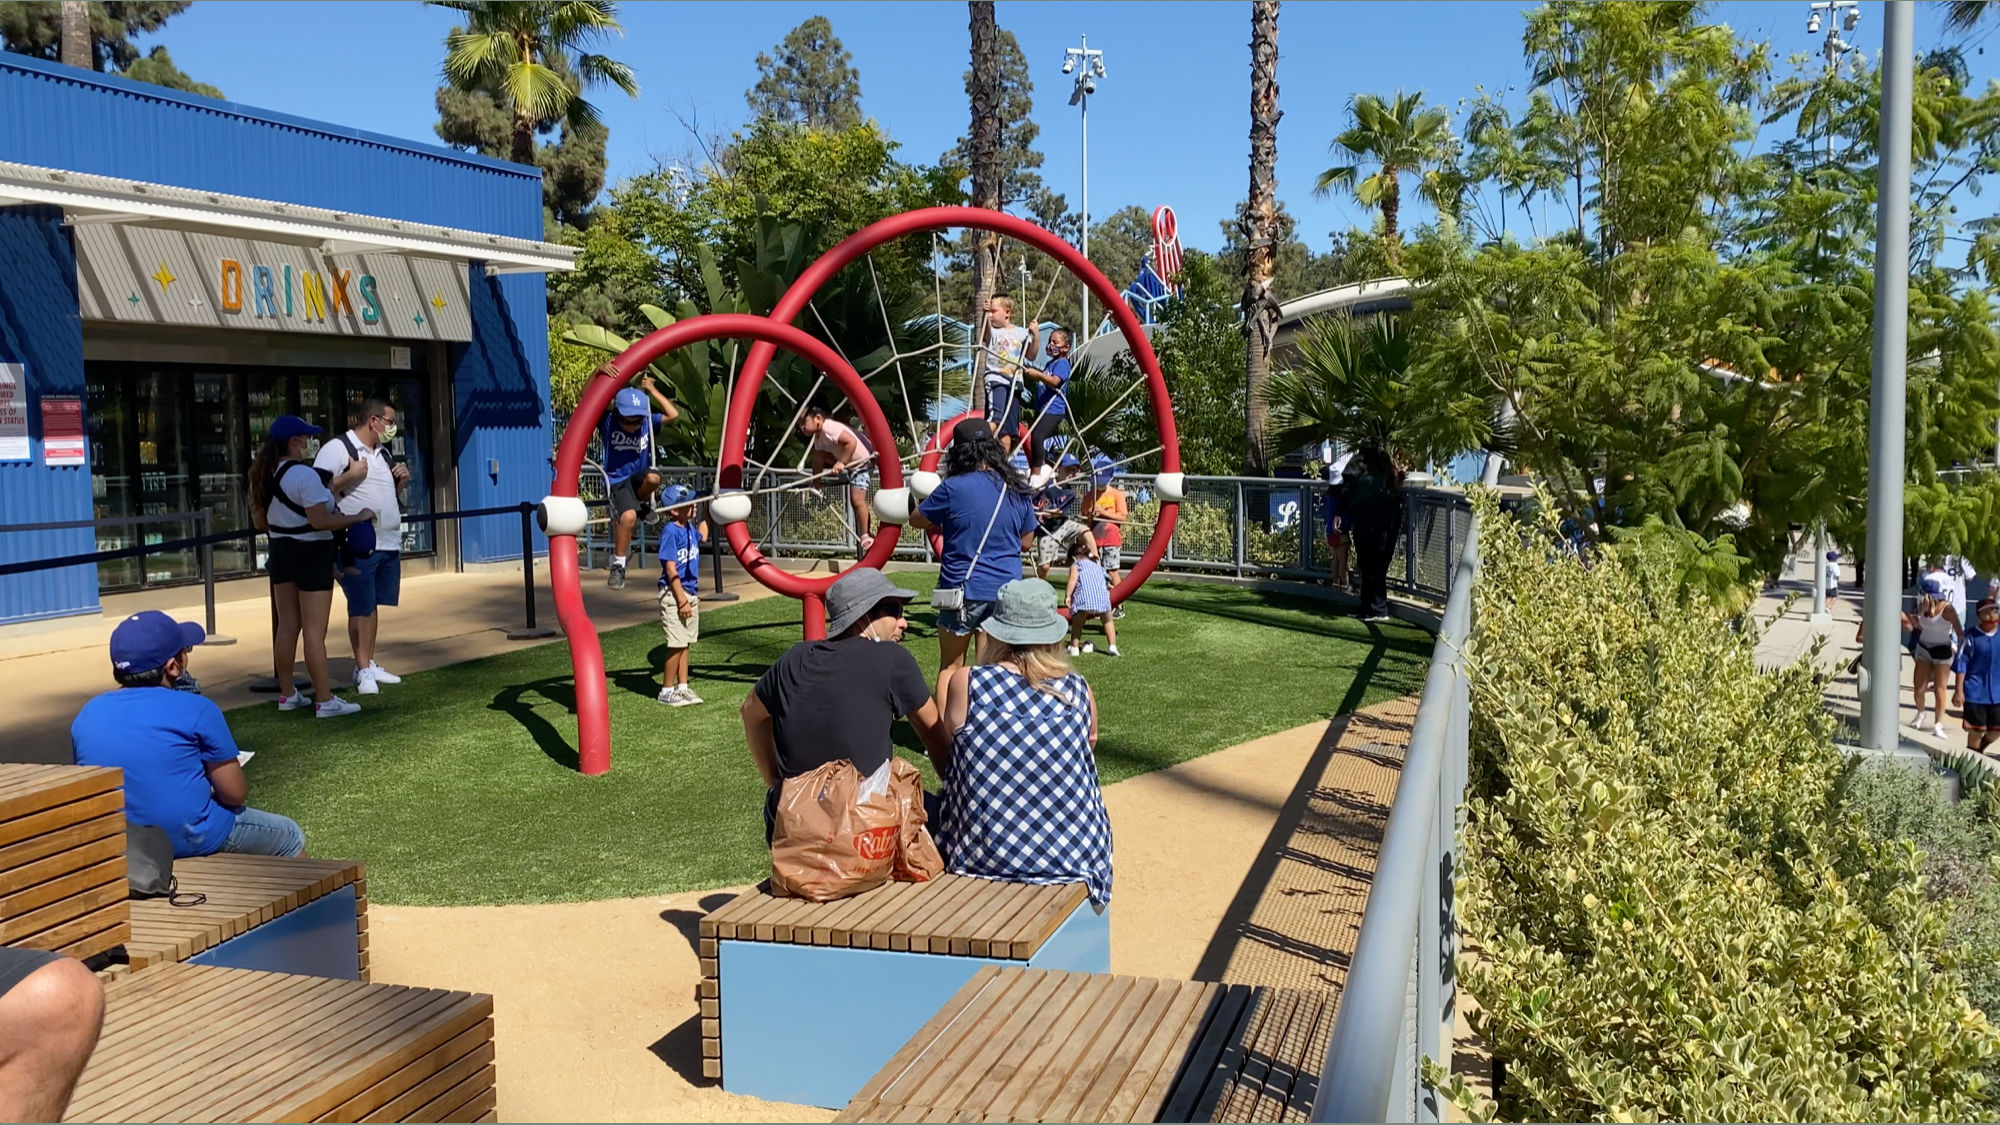 Kid's Play Areas Next to Drinks